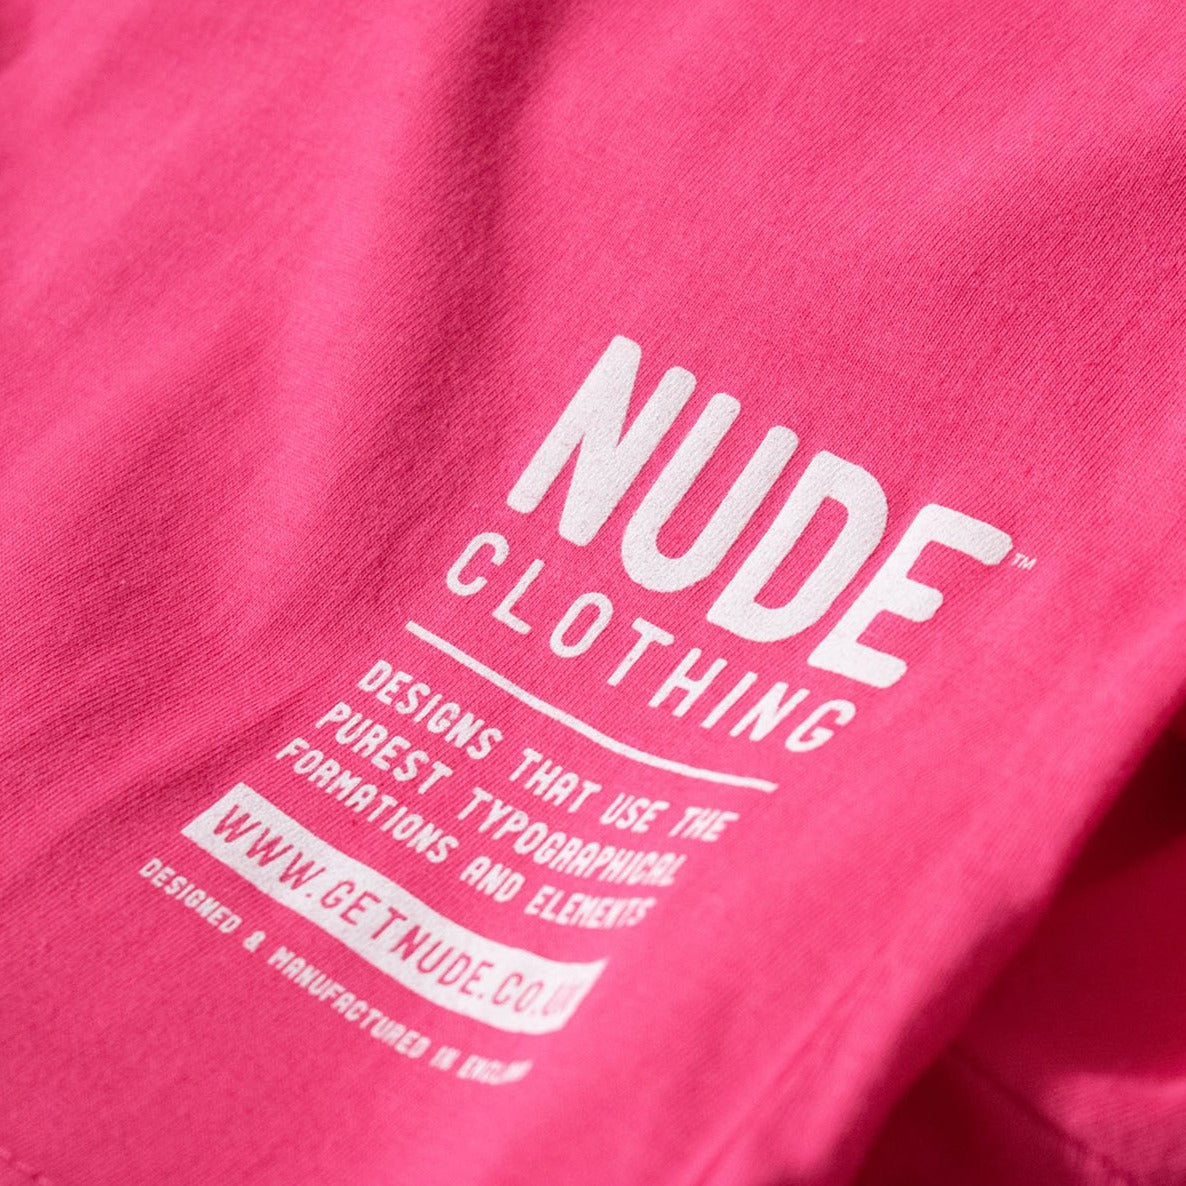 Classic Nude T-Shirt - Pink